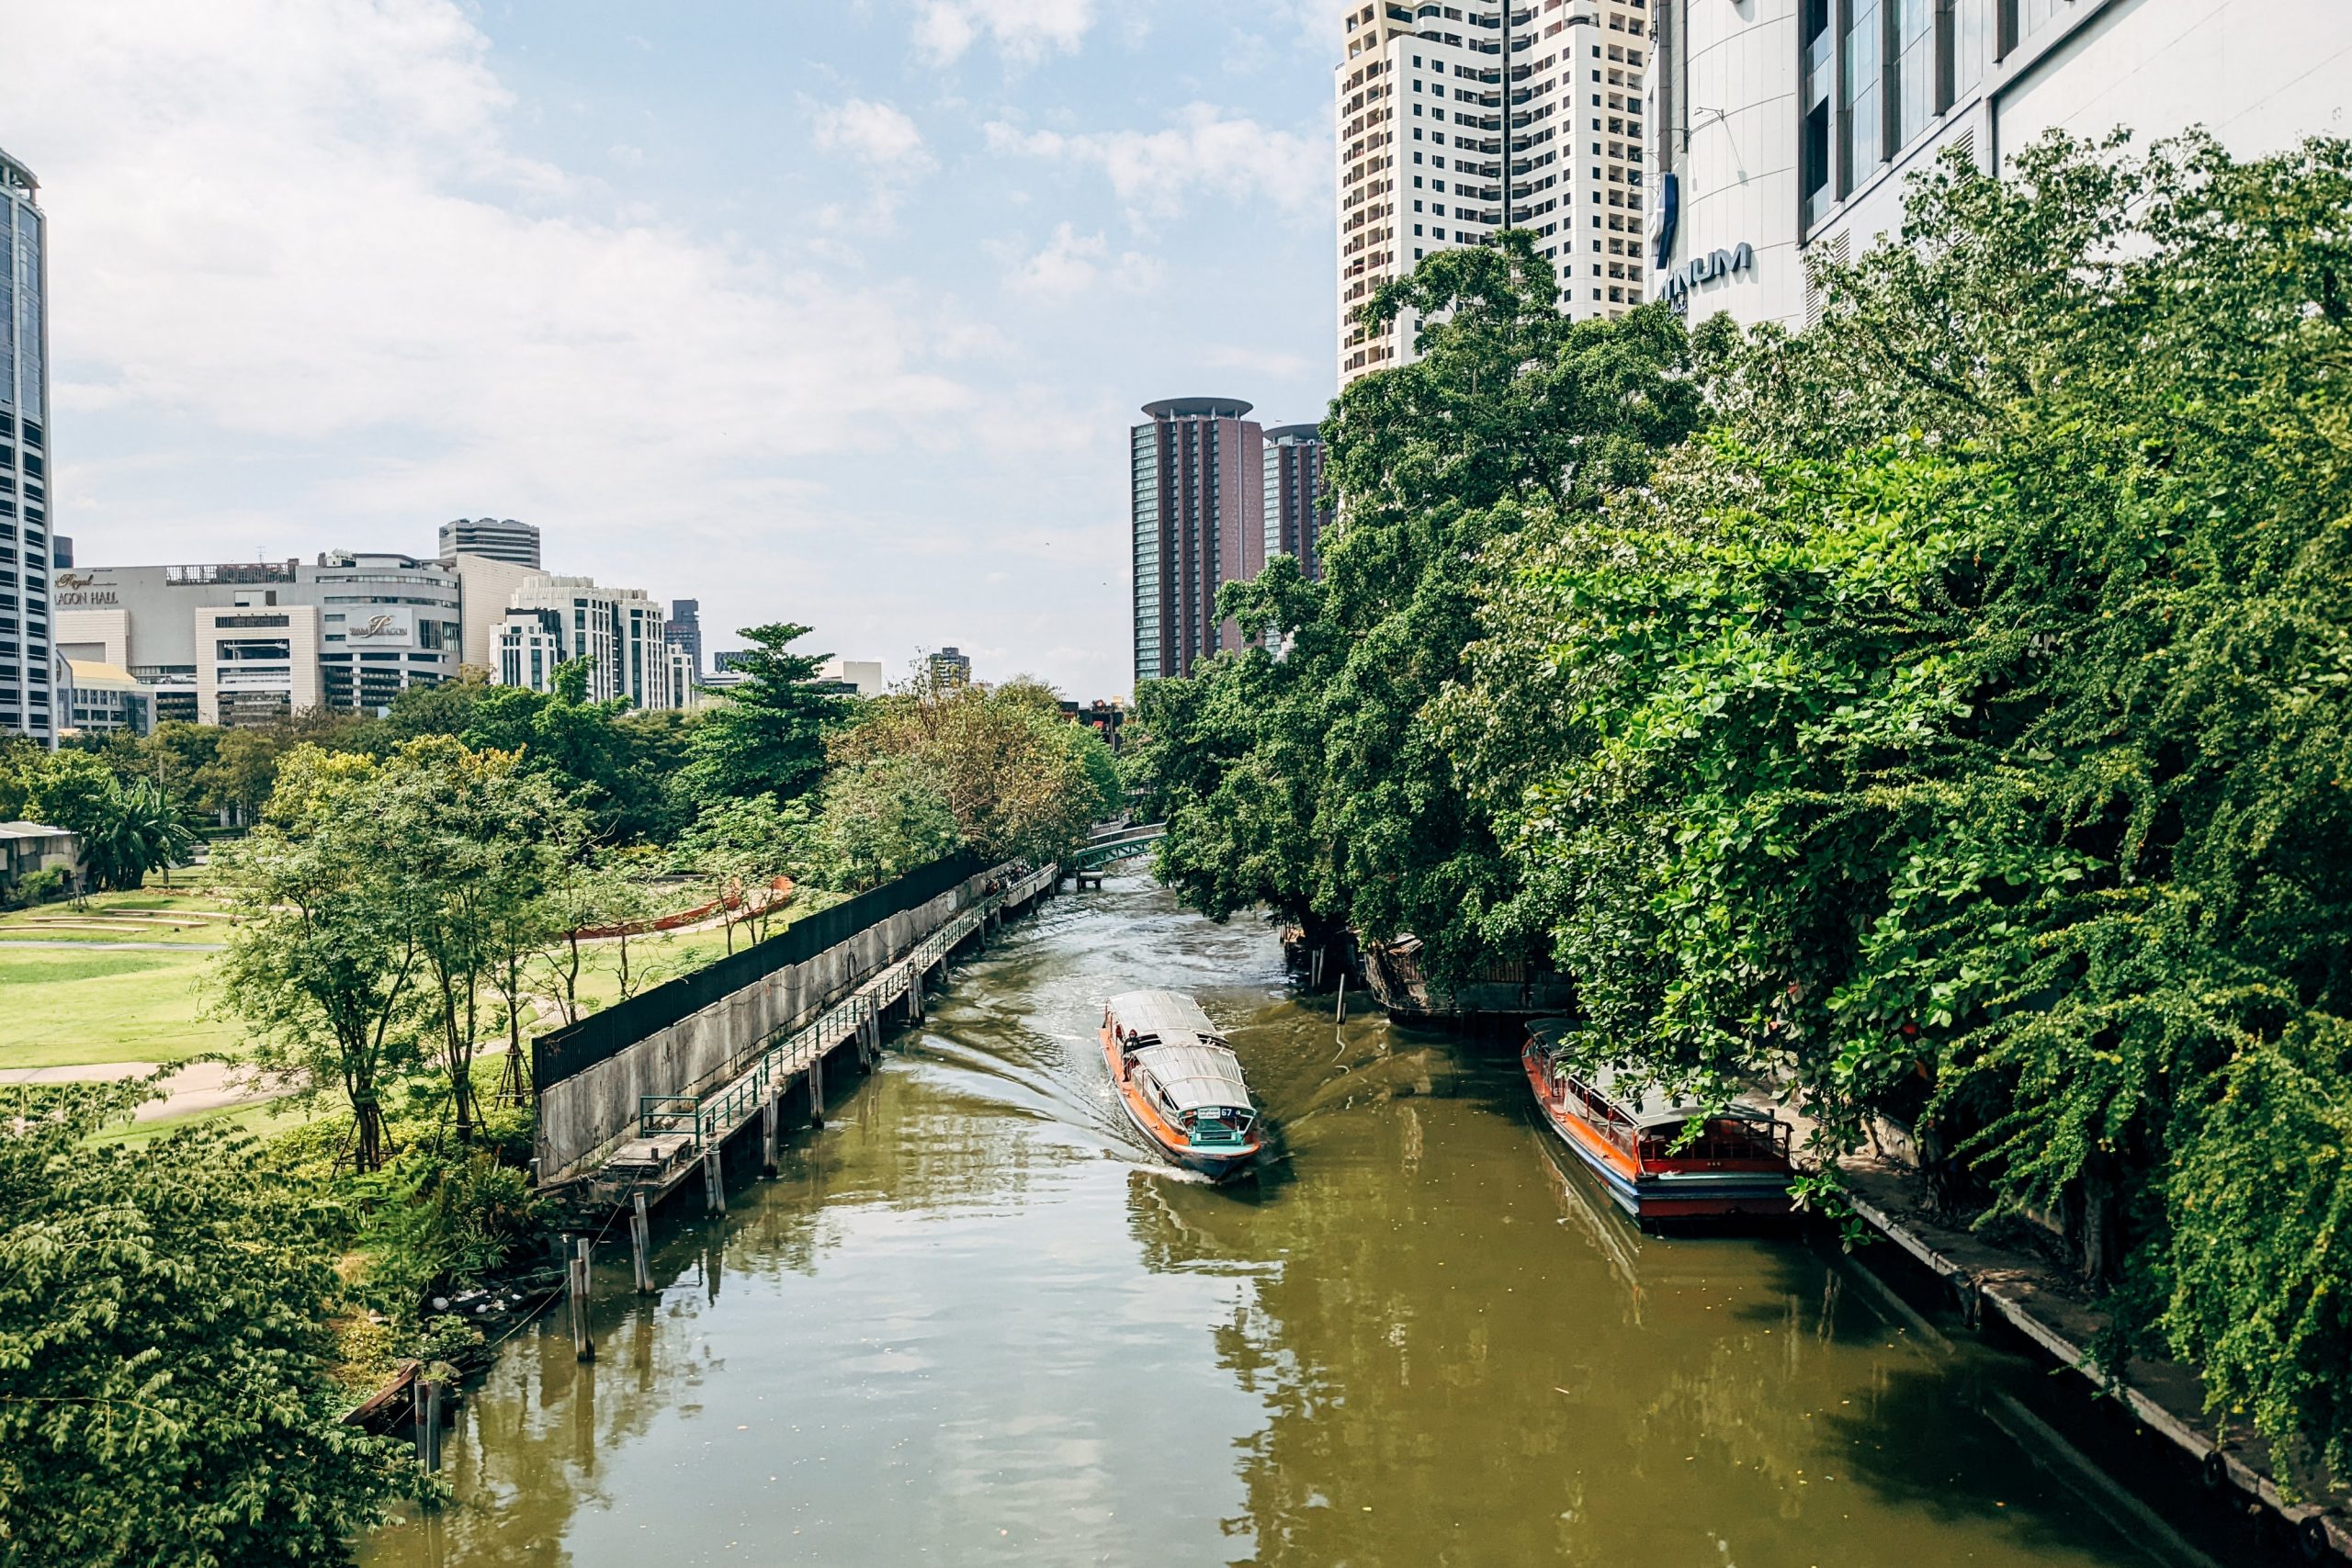 Riverside with its calming boats is a great place to stay in Bangkok for couples